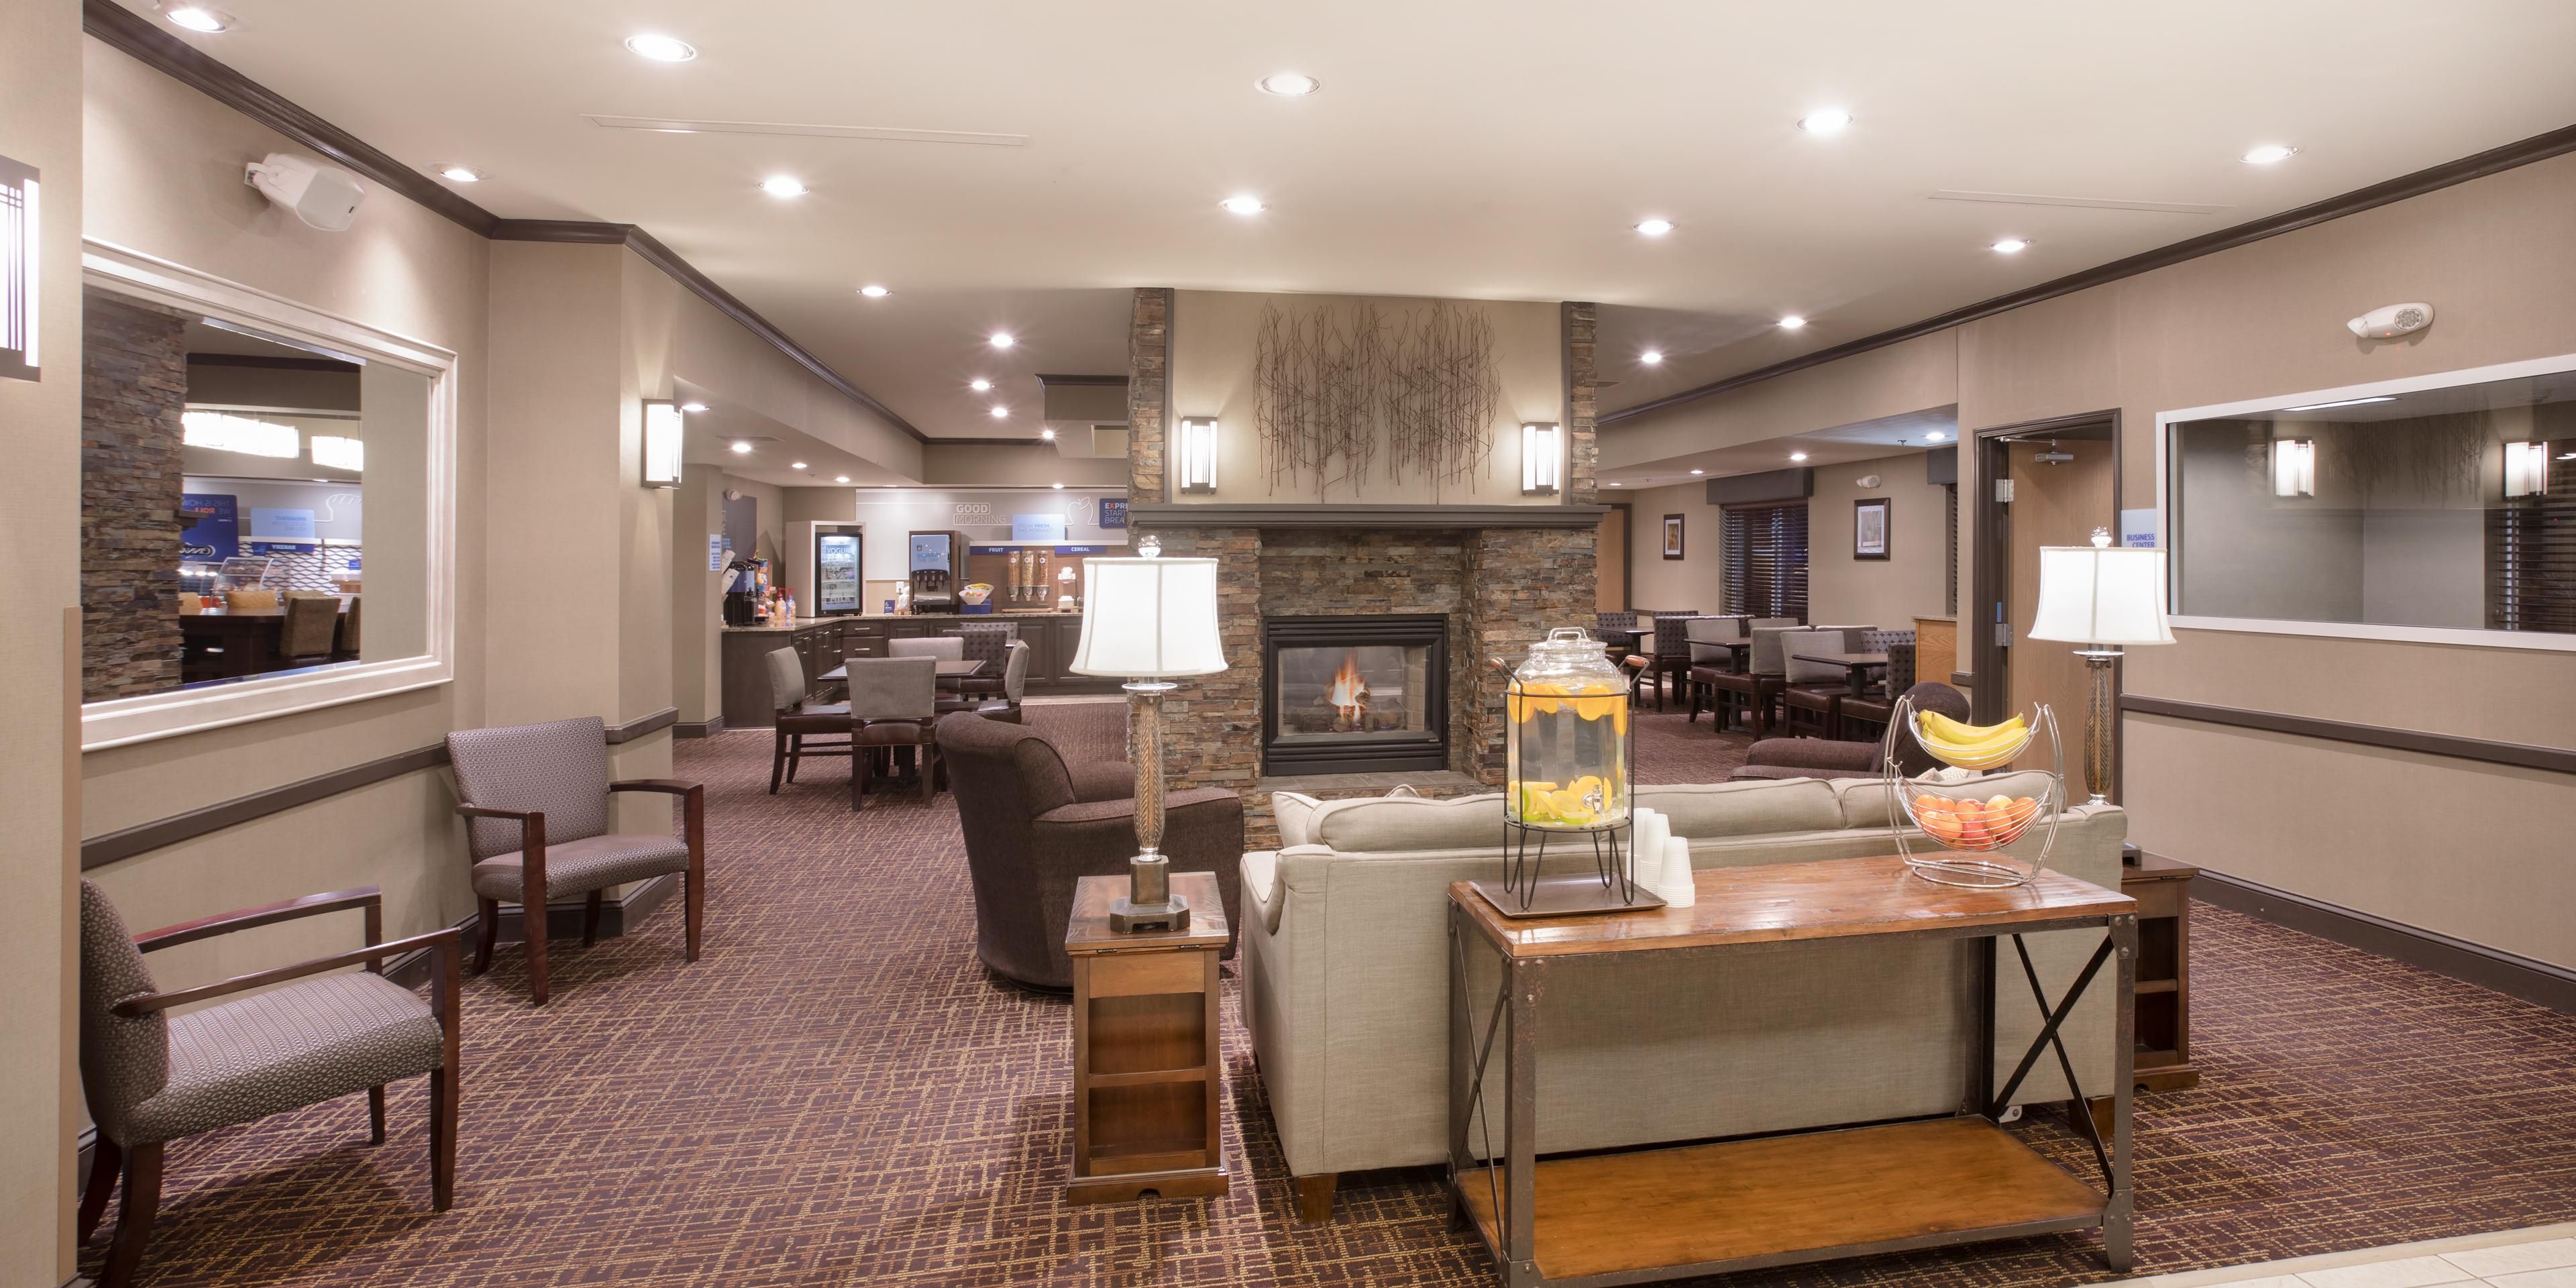 Enjoy free beer & wine Monday through Thursday from 5:15pm - 7:15pm in our lobby.  Relax by the fireplace, or enjoy other guest's company during your weekday travels.